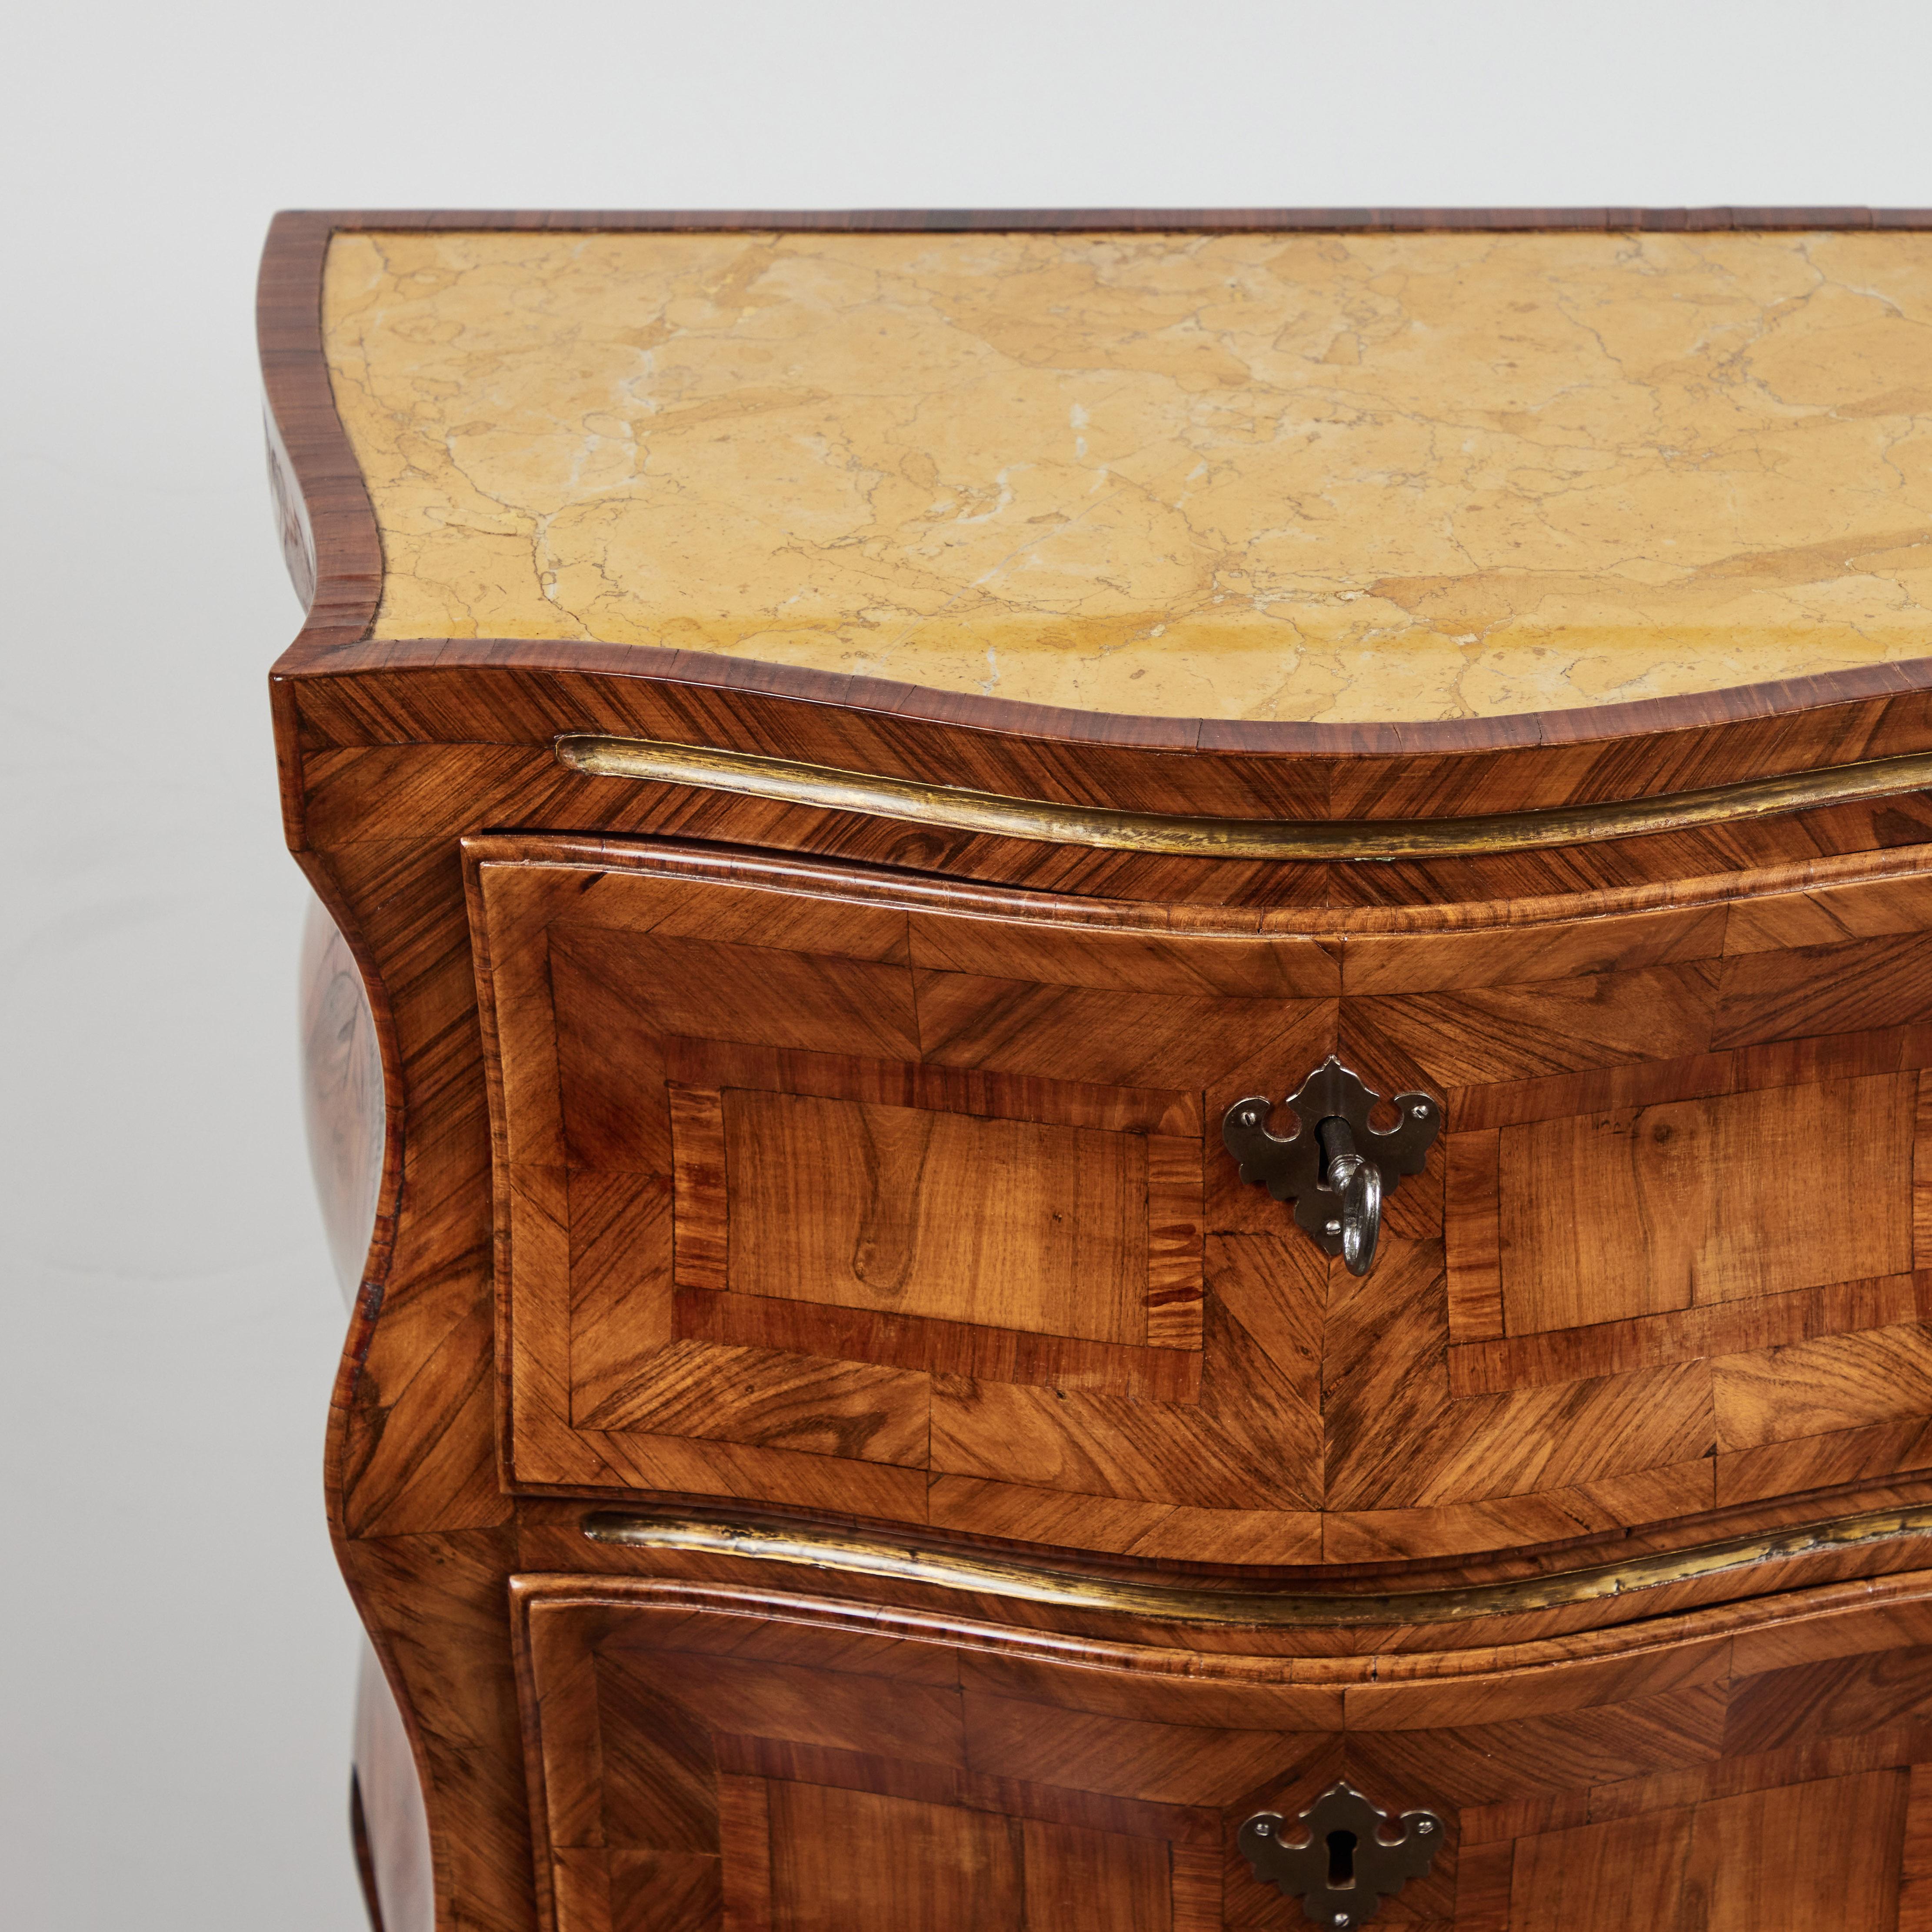 Beautiful burled walnut veneered and inlaid 2 drawer commodino. Beautiful movement. Patinated bronze locks and sabots. Parcel gilt lines. Inset sienna marble top. From the area of Sicily.